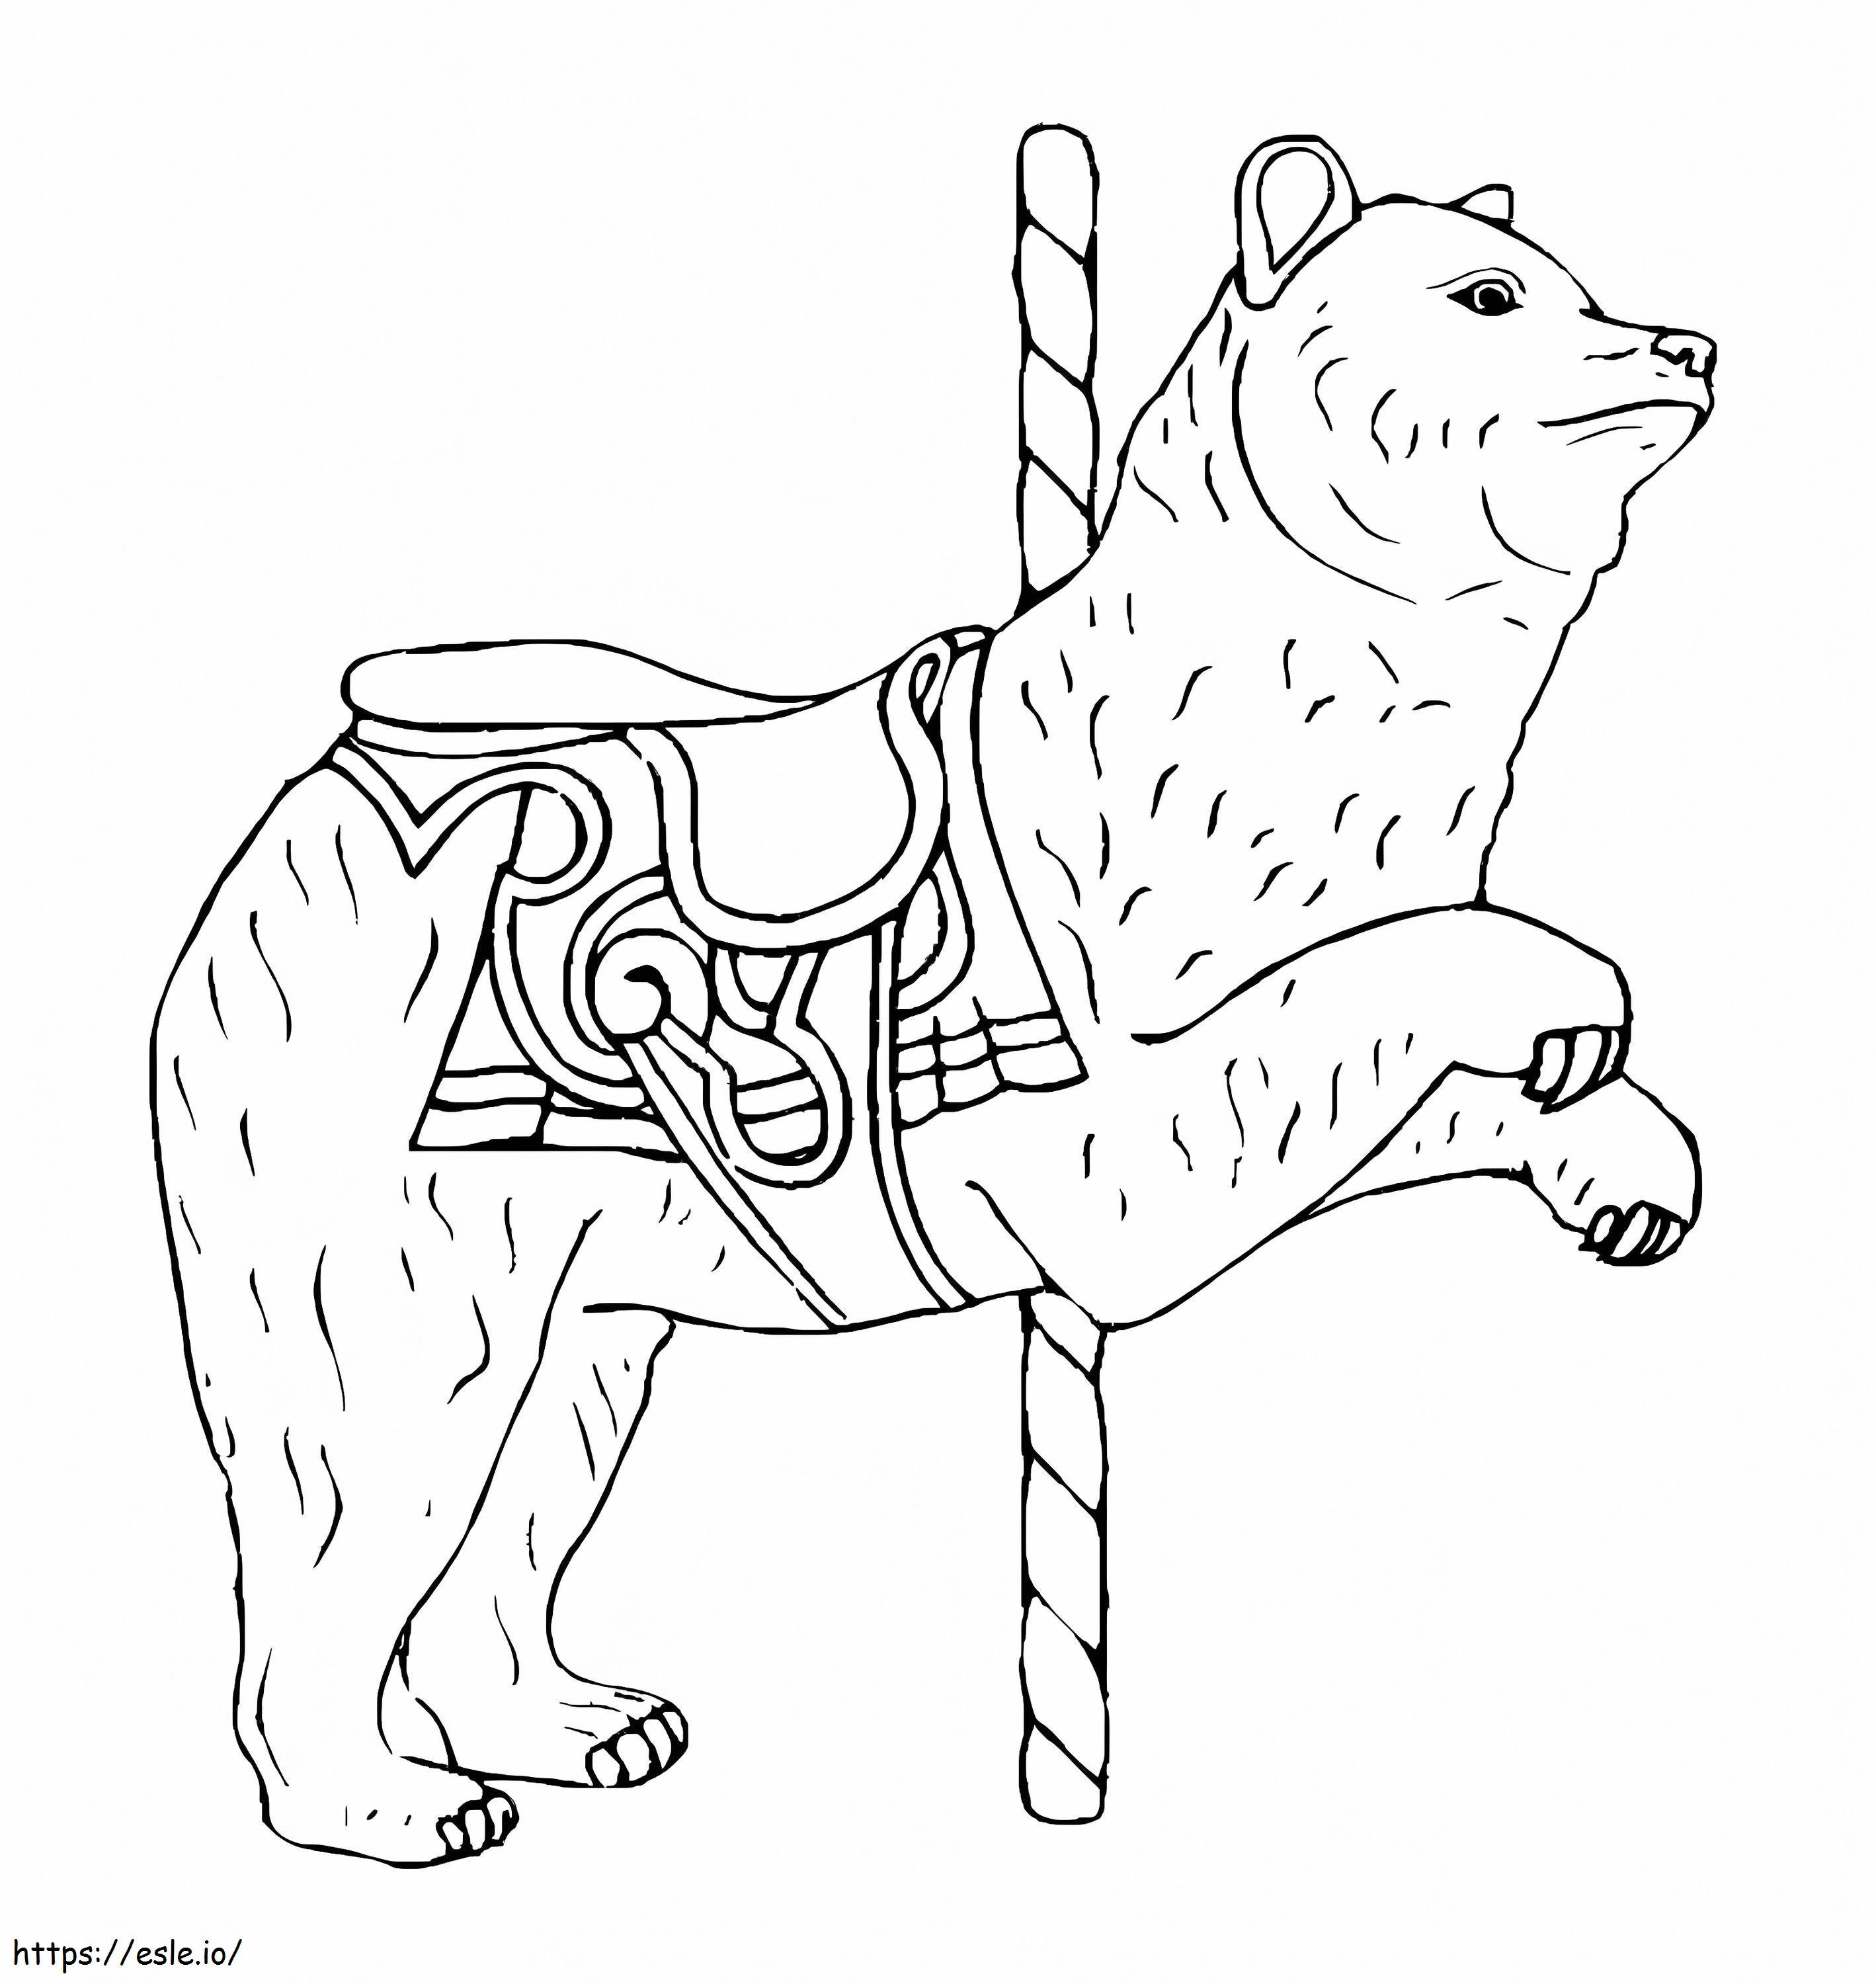 Carousel Bear coloring page